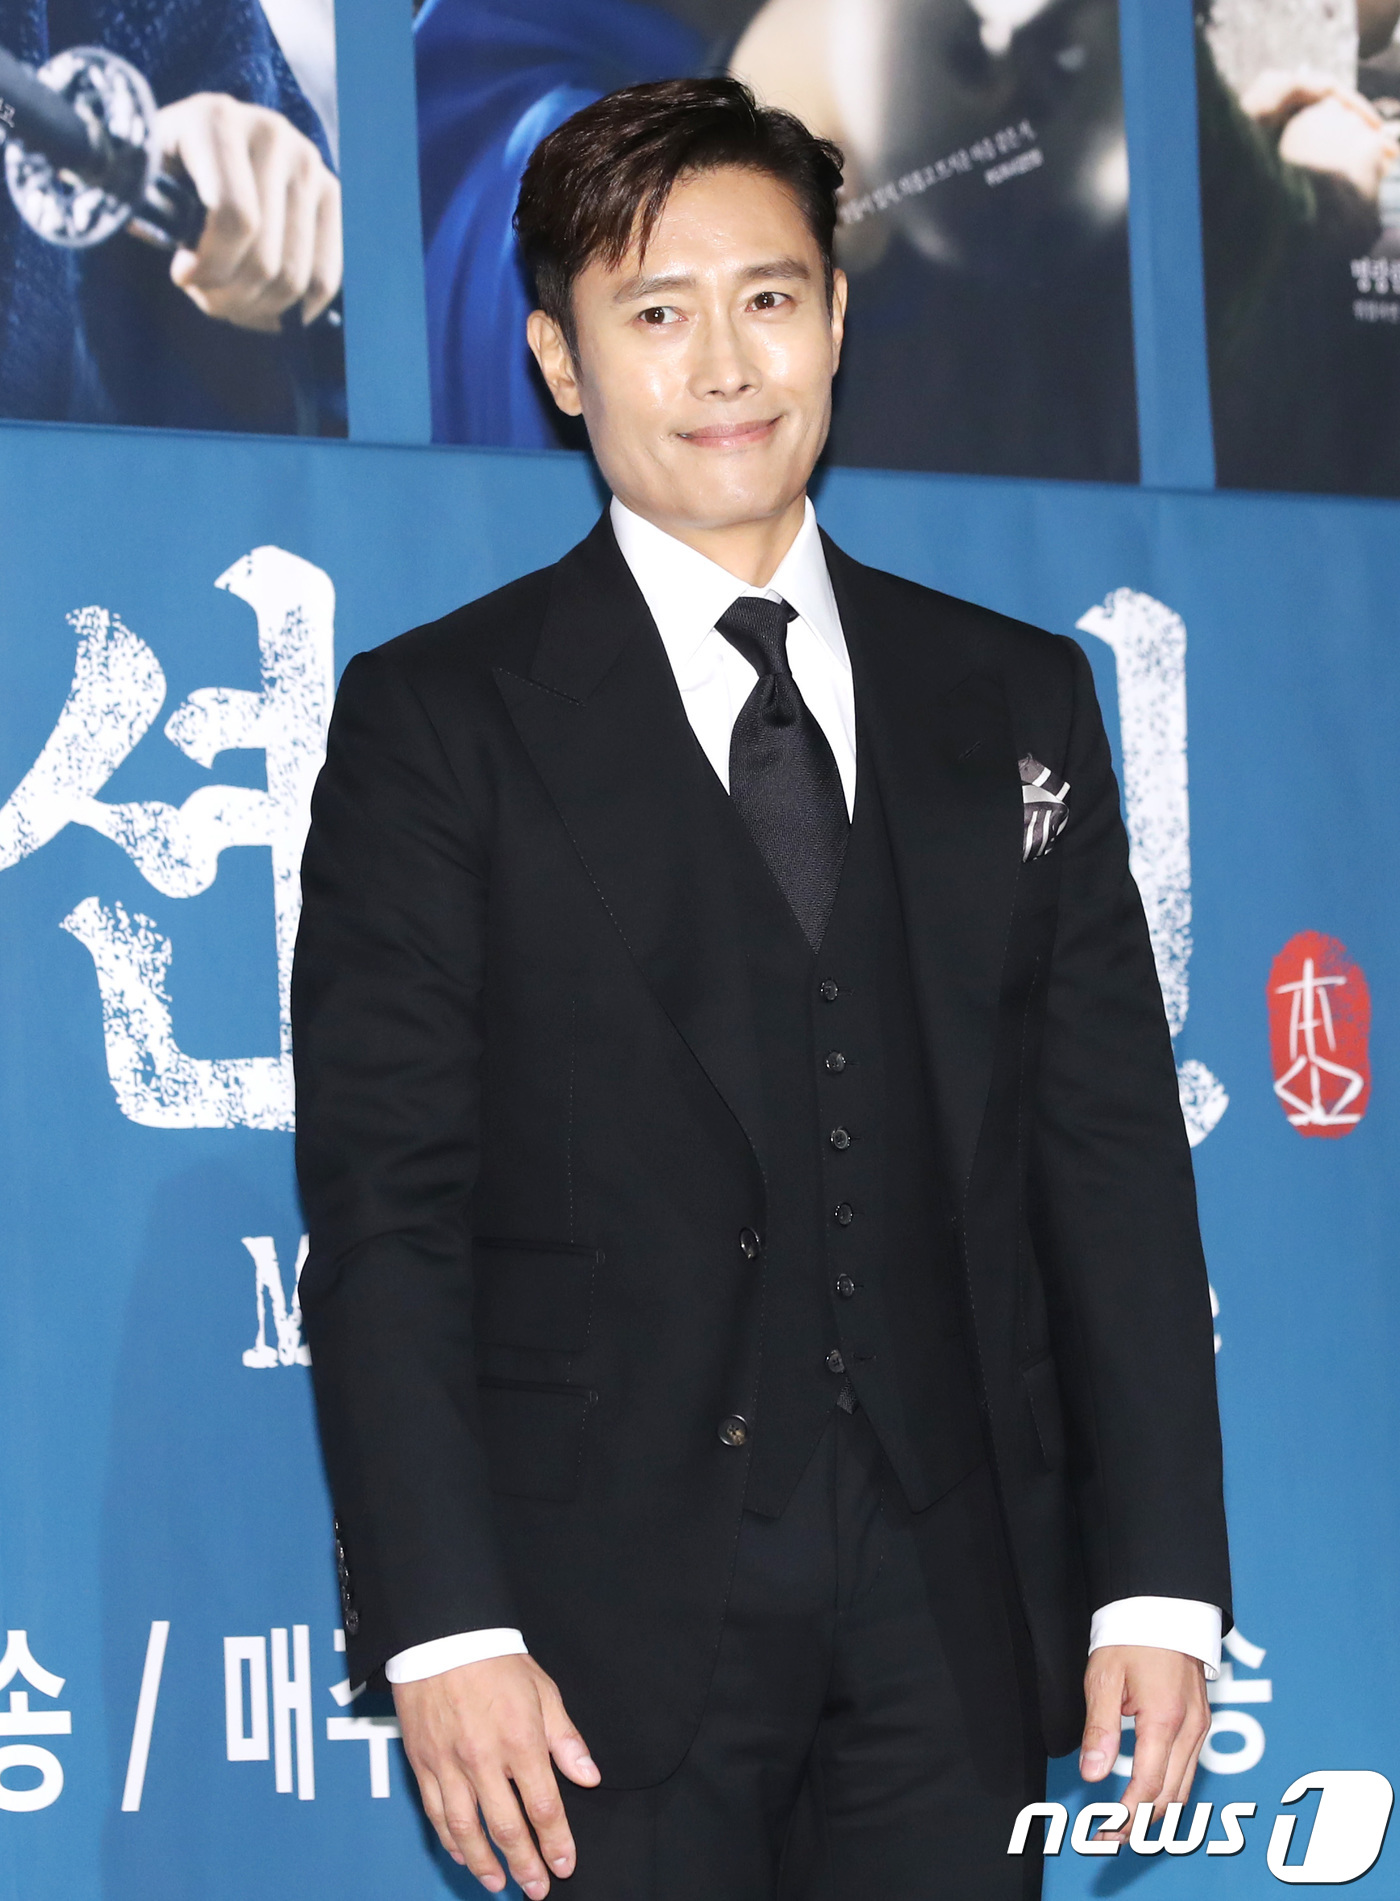 Mr. Sunshine is a drama about what happens when a boy, Eugene Choy (Lee Byung-hun), who boarded a warship and fell into the United States of America during the United States Expedition to Korea (1871), returns to his country, Joseon, where he abandoned himself as a United States of America soldier.6.26, 2018.